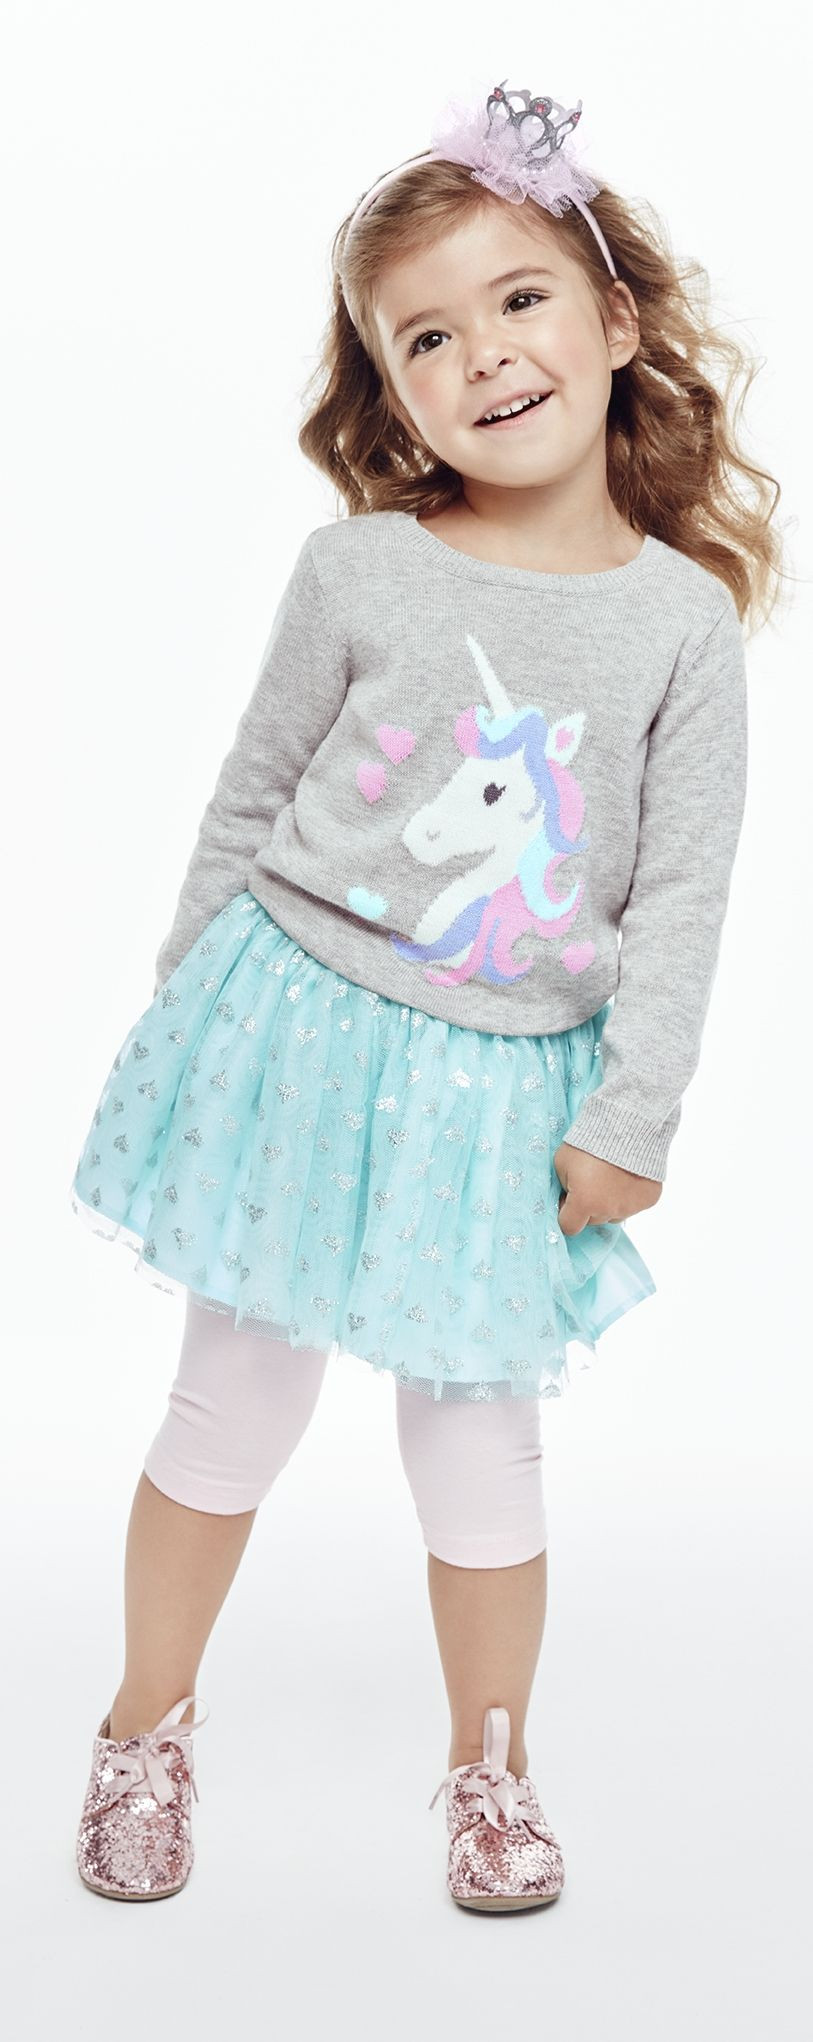 Little Kids Fashion
 Magical style for your little princess